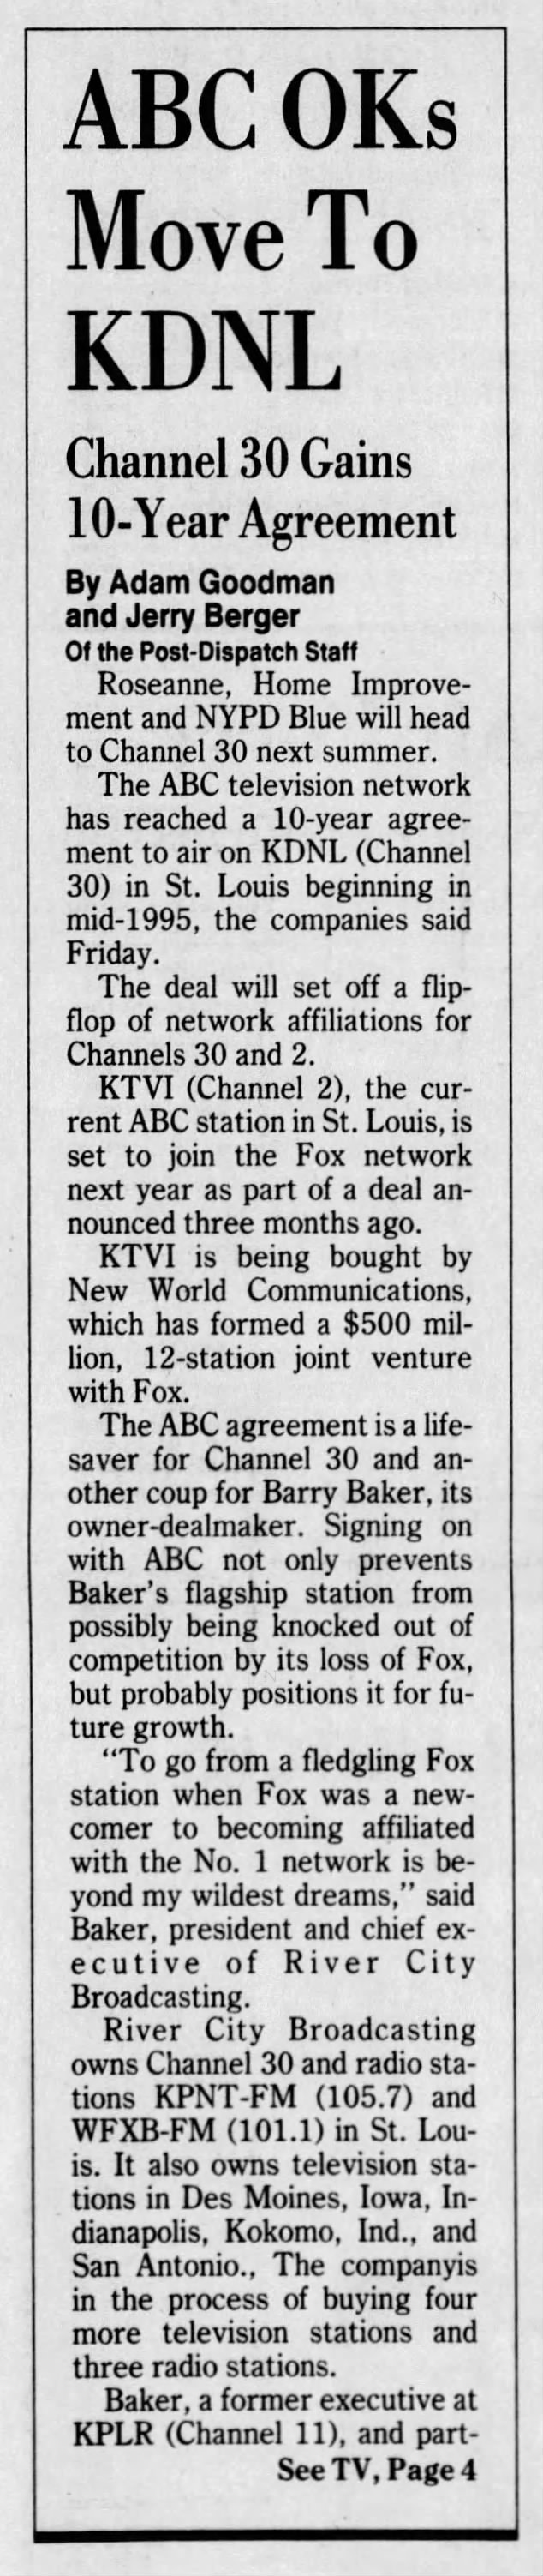 ABC OKs Move To KDNL: Channel 30 Gains 10-Year Agreement